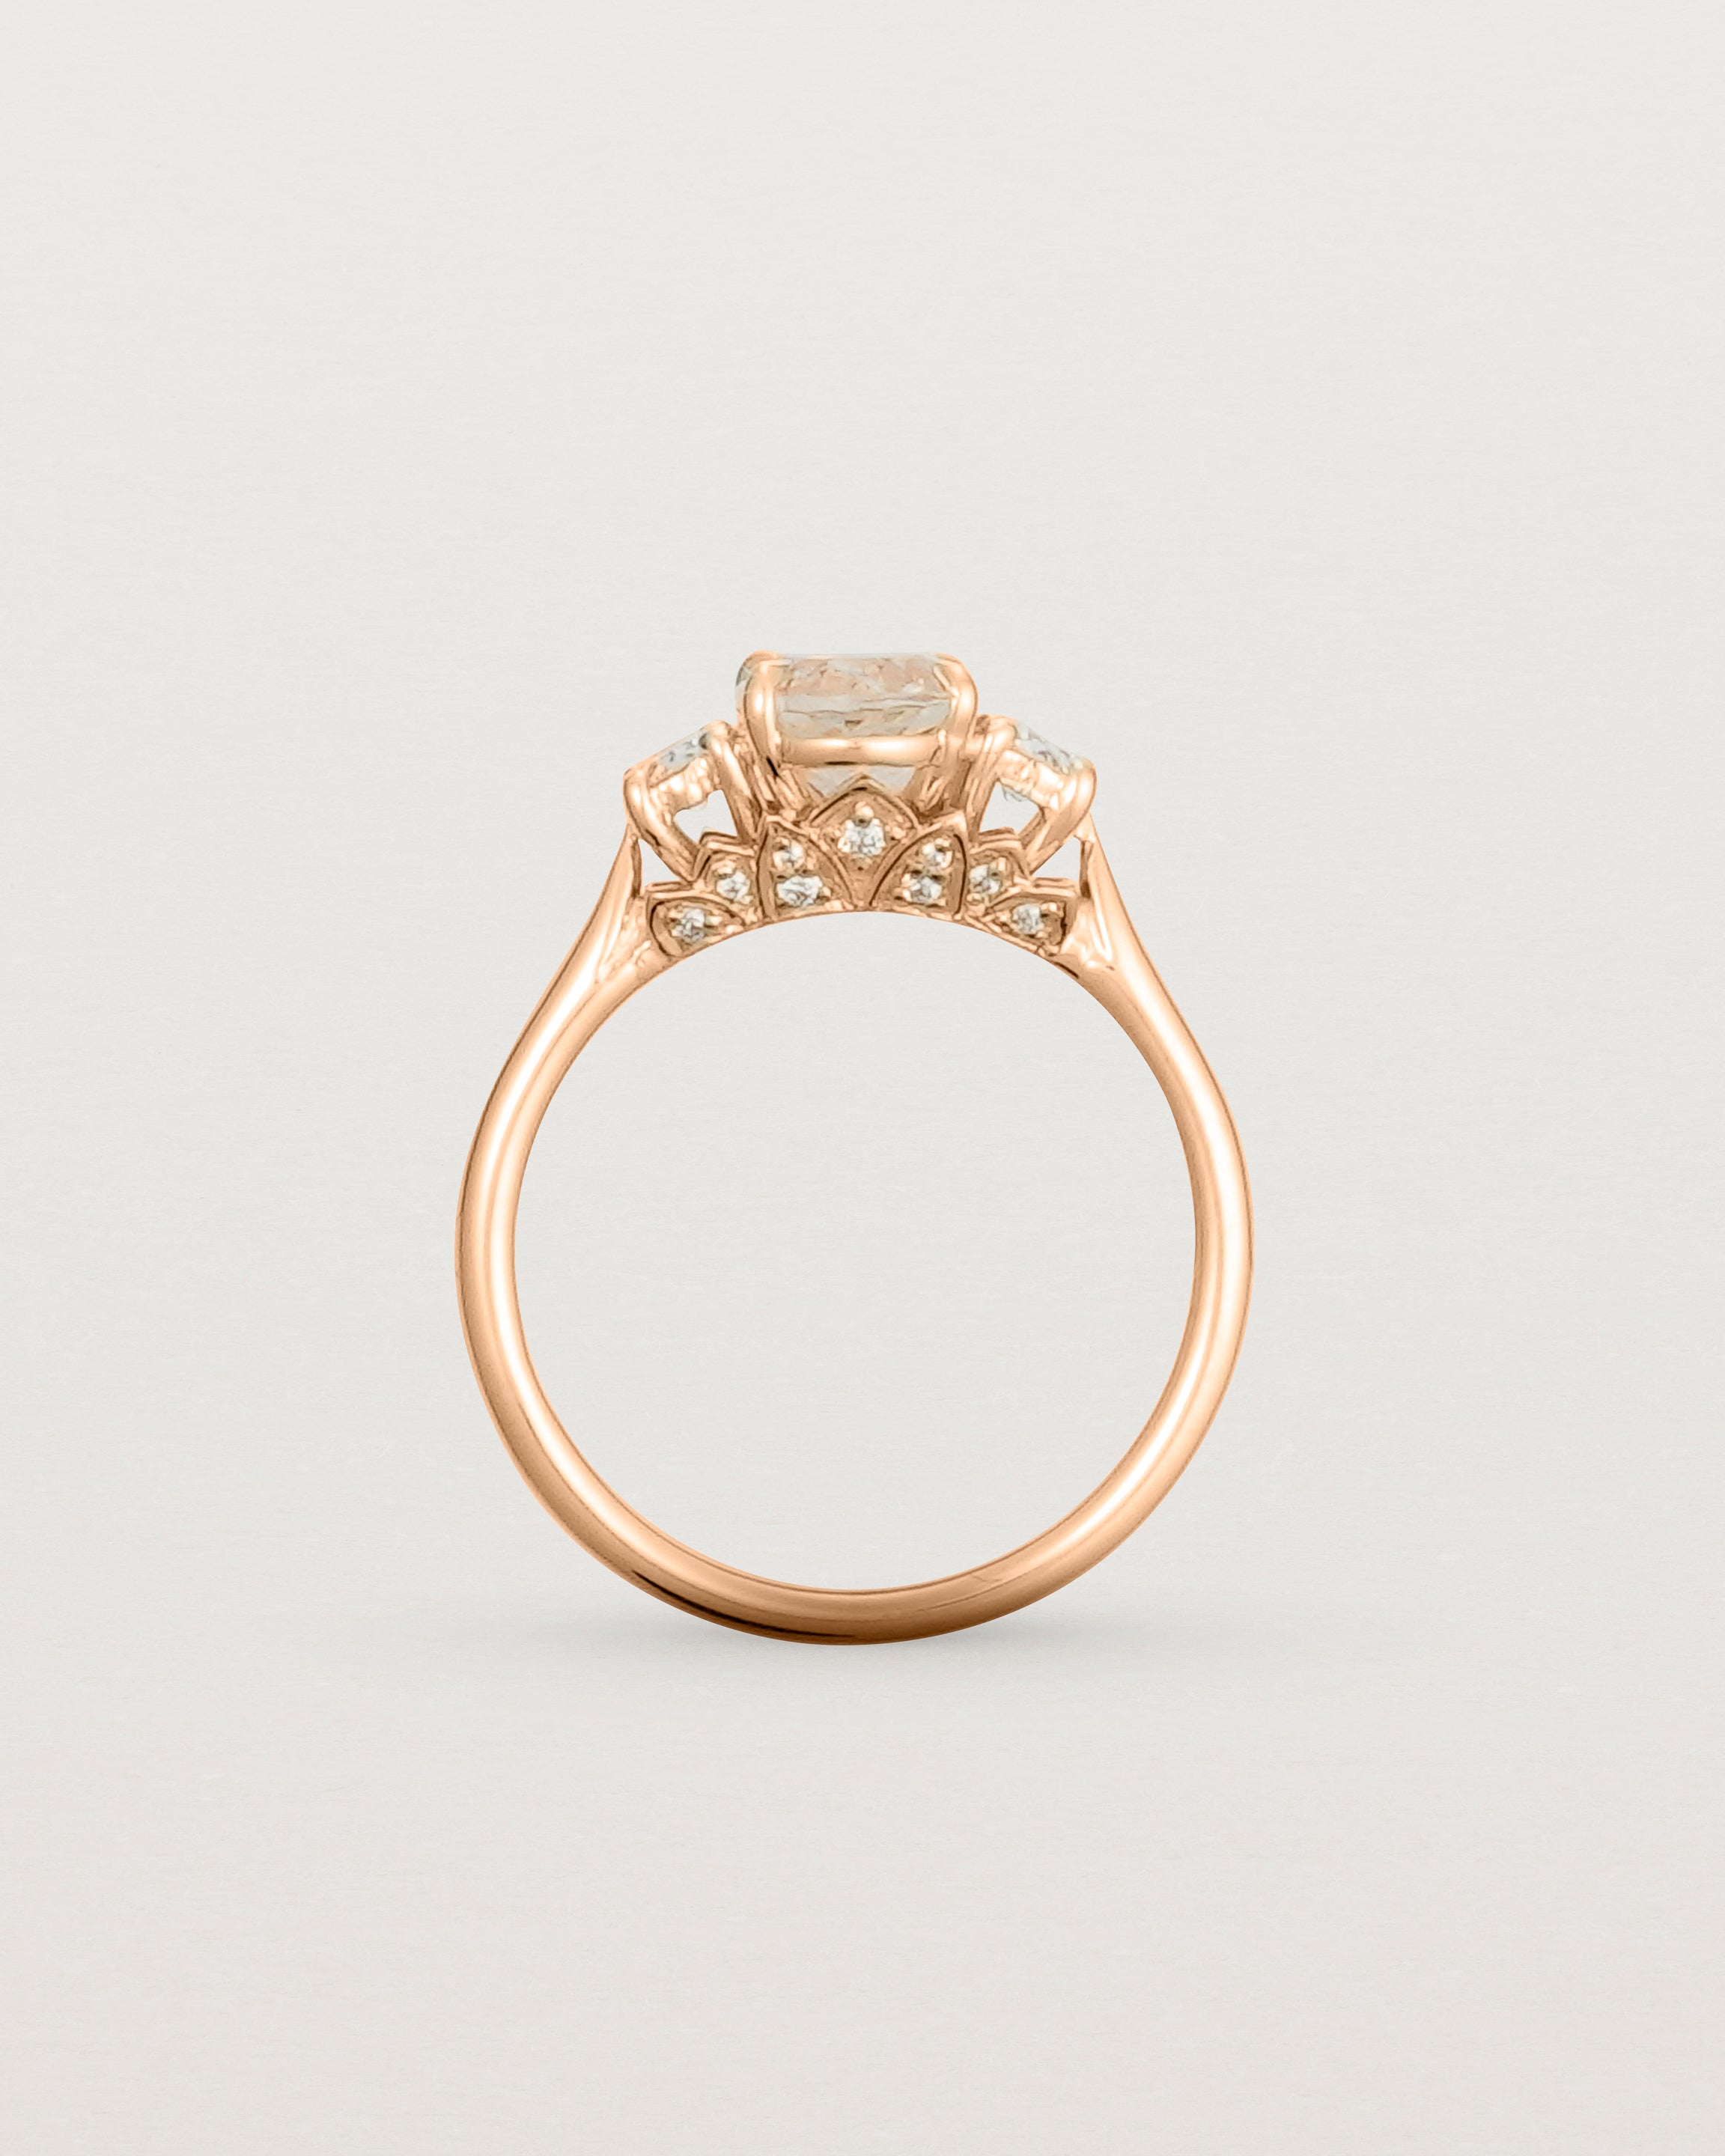 Standing view of the Laurel Oval Trio Ring | Savannah Sunstone | Rose Gold.